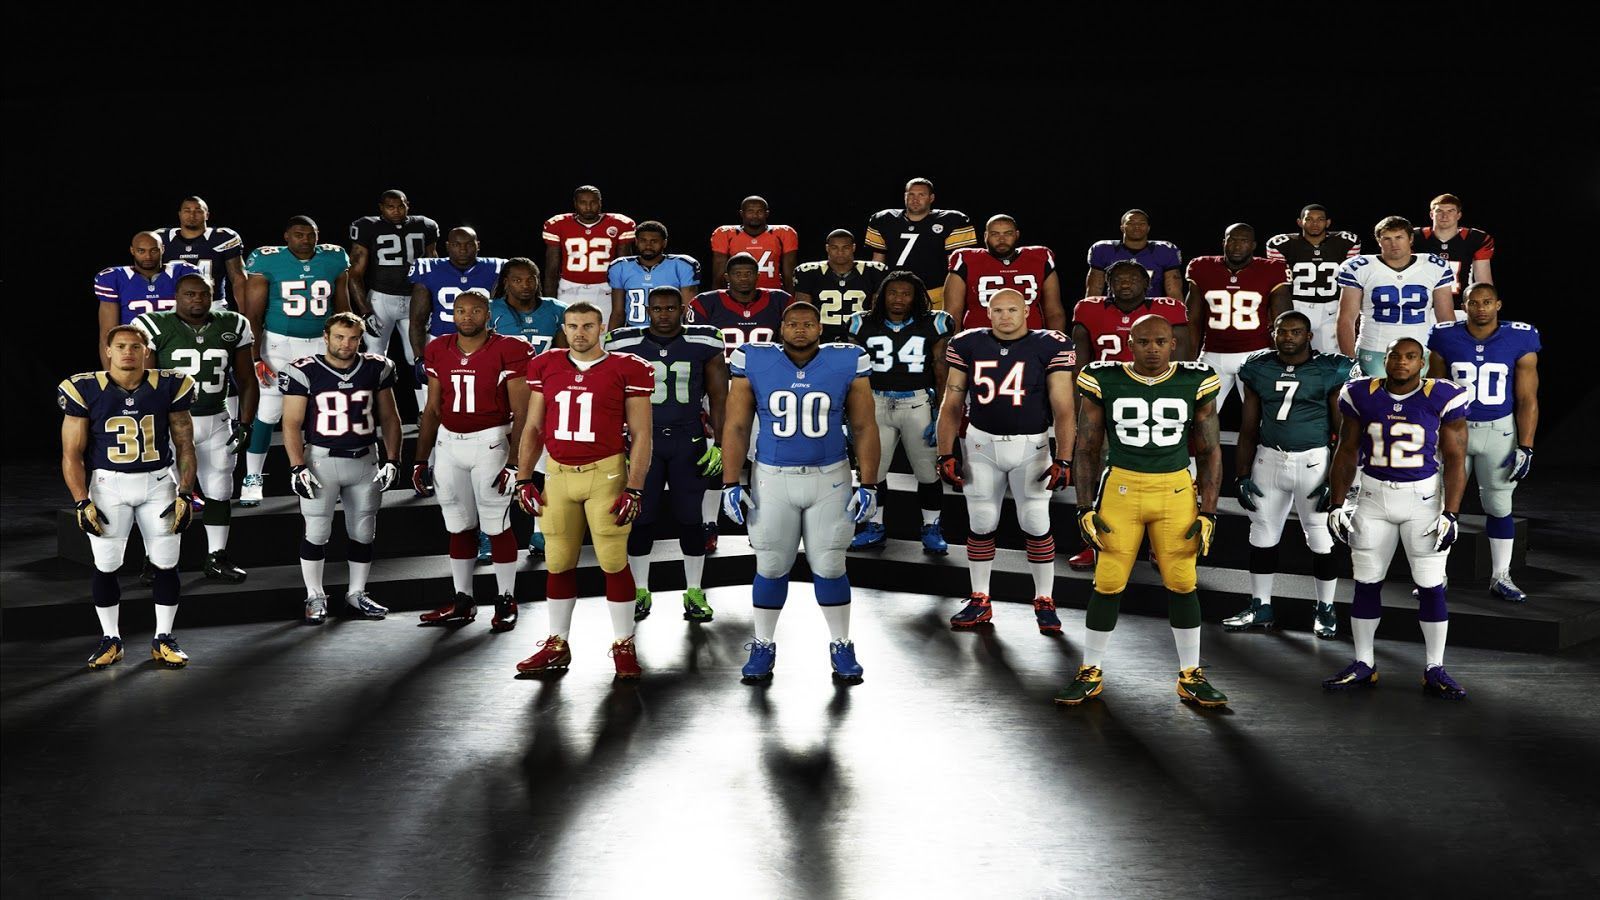 Nfl Players Wallpaper Sports Images